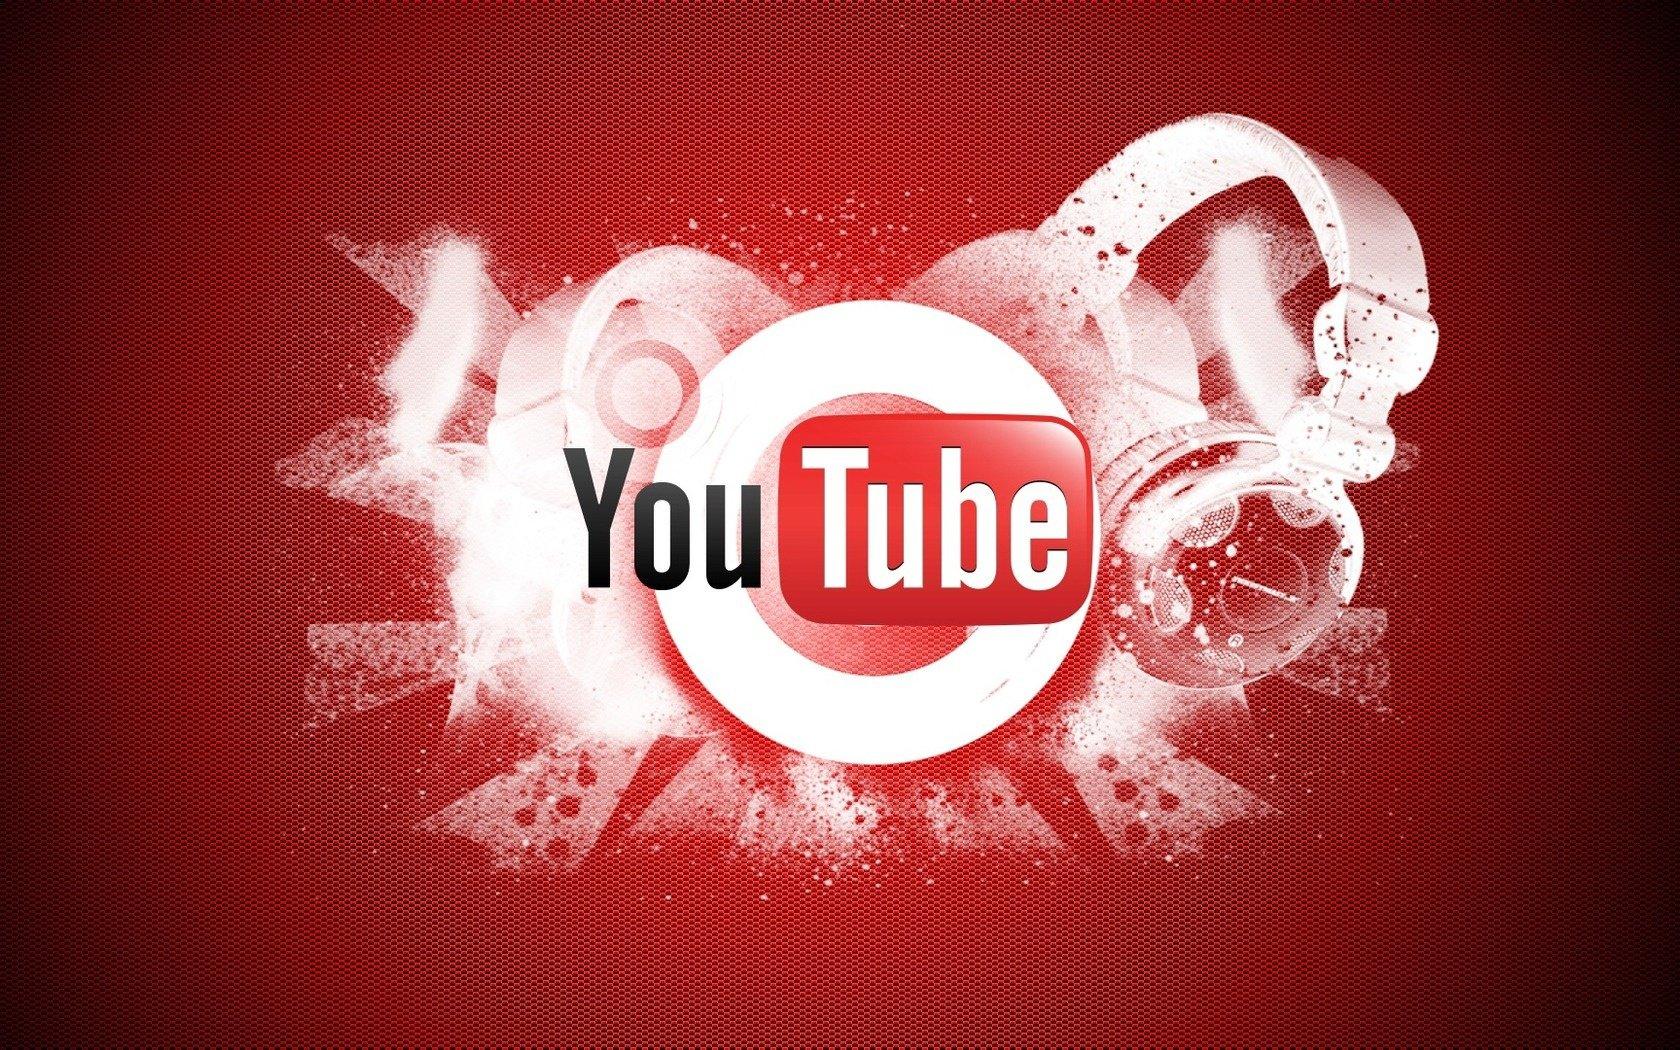 Download Youtube Logo Wallpaper, HD Backgrounds Download - itl.cat